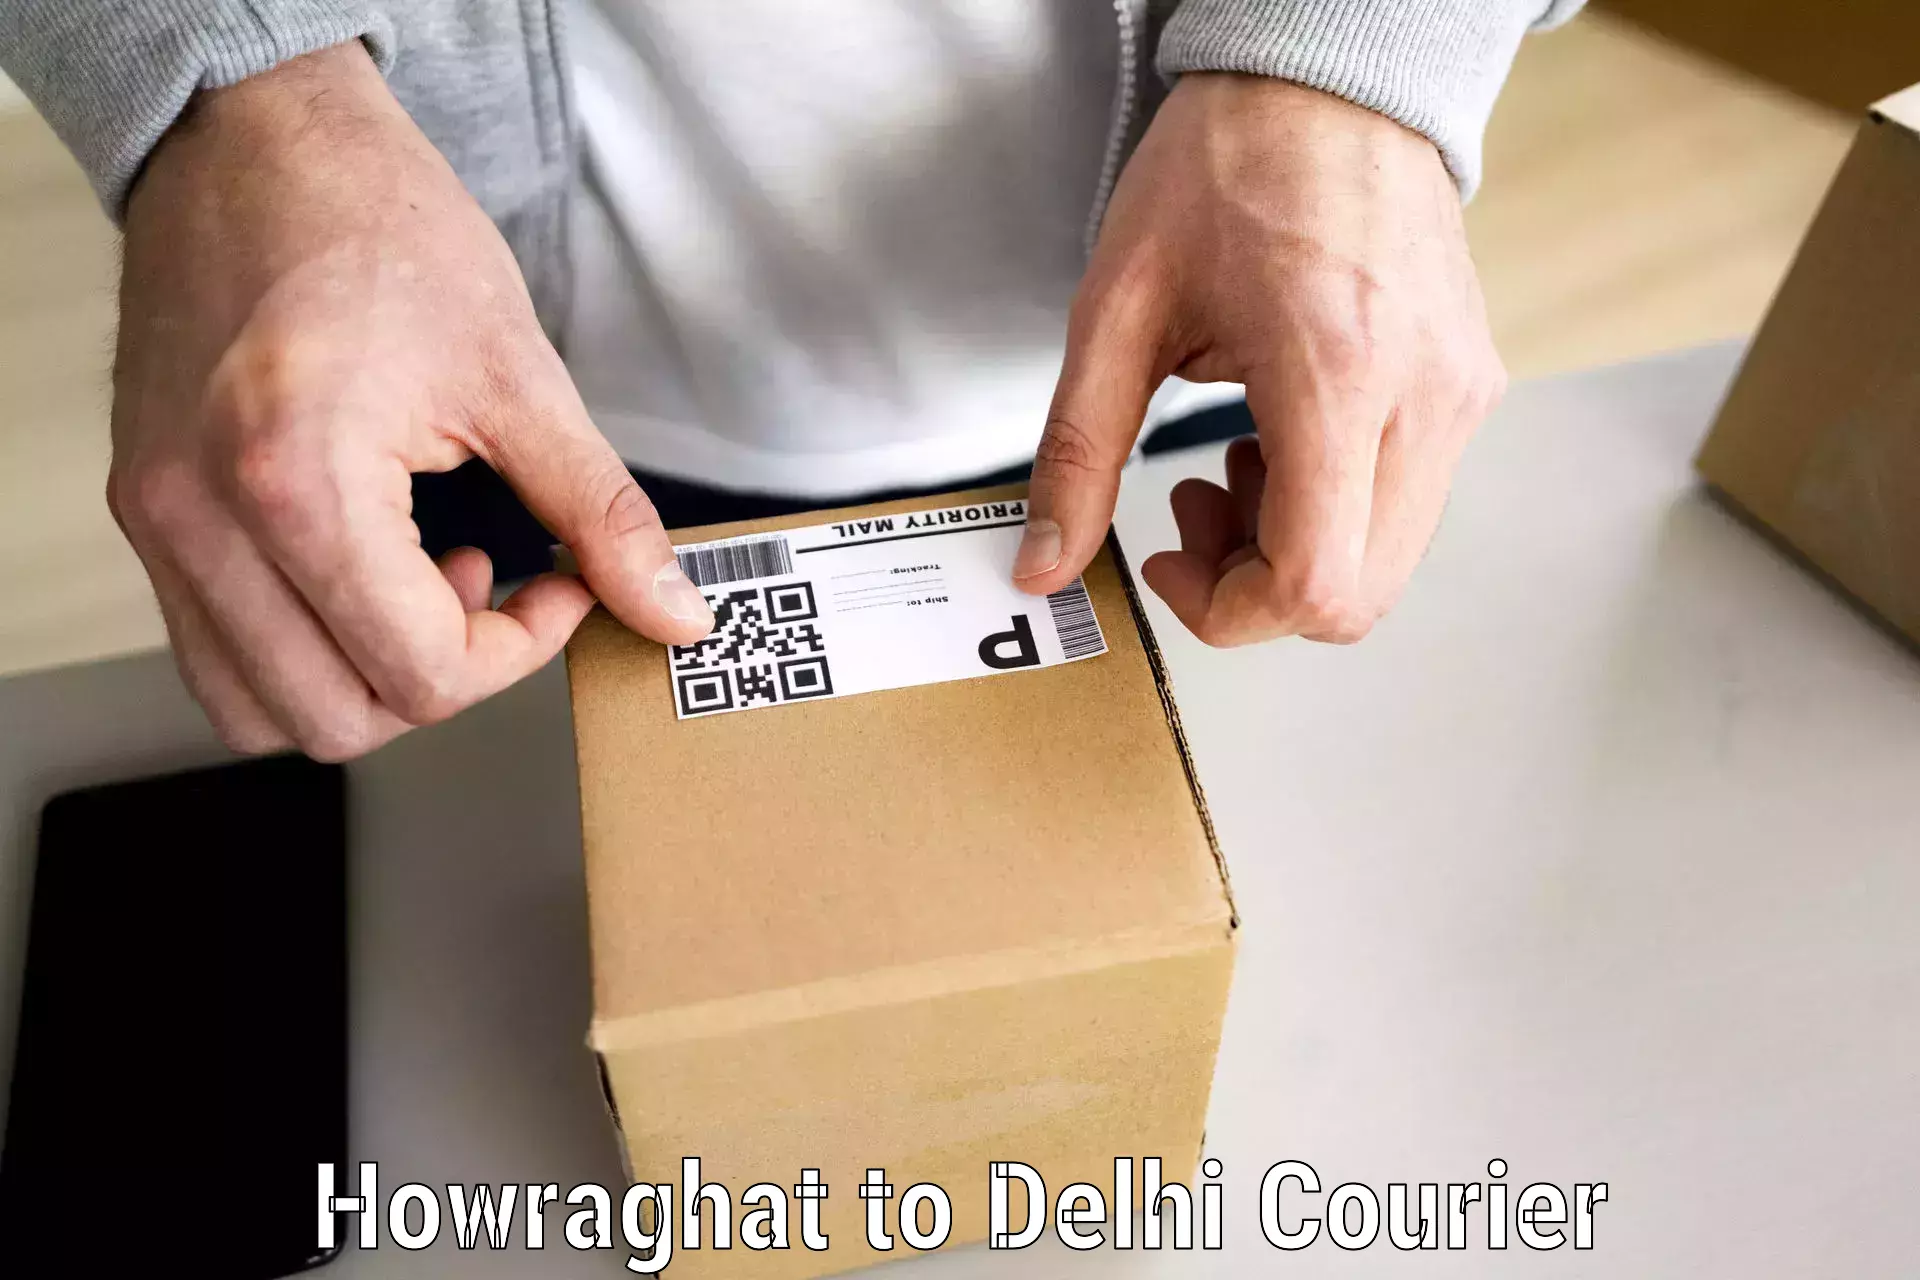 Furniture relocation experts Howraghat to Lodhi Road